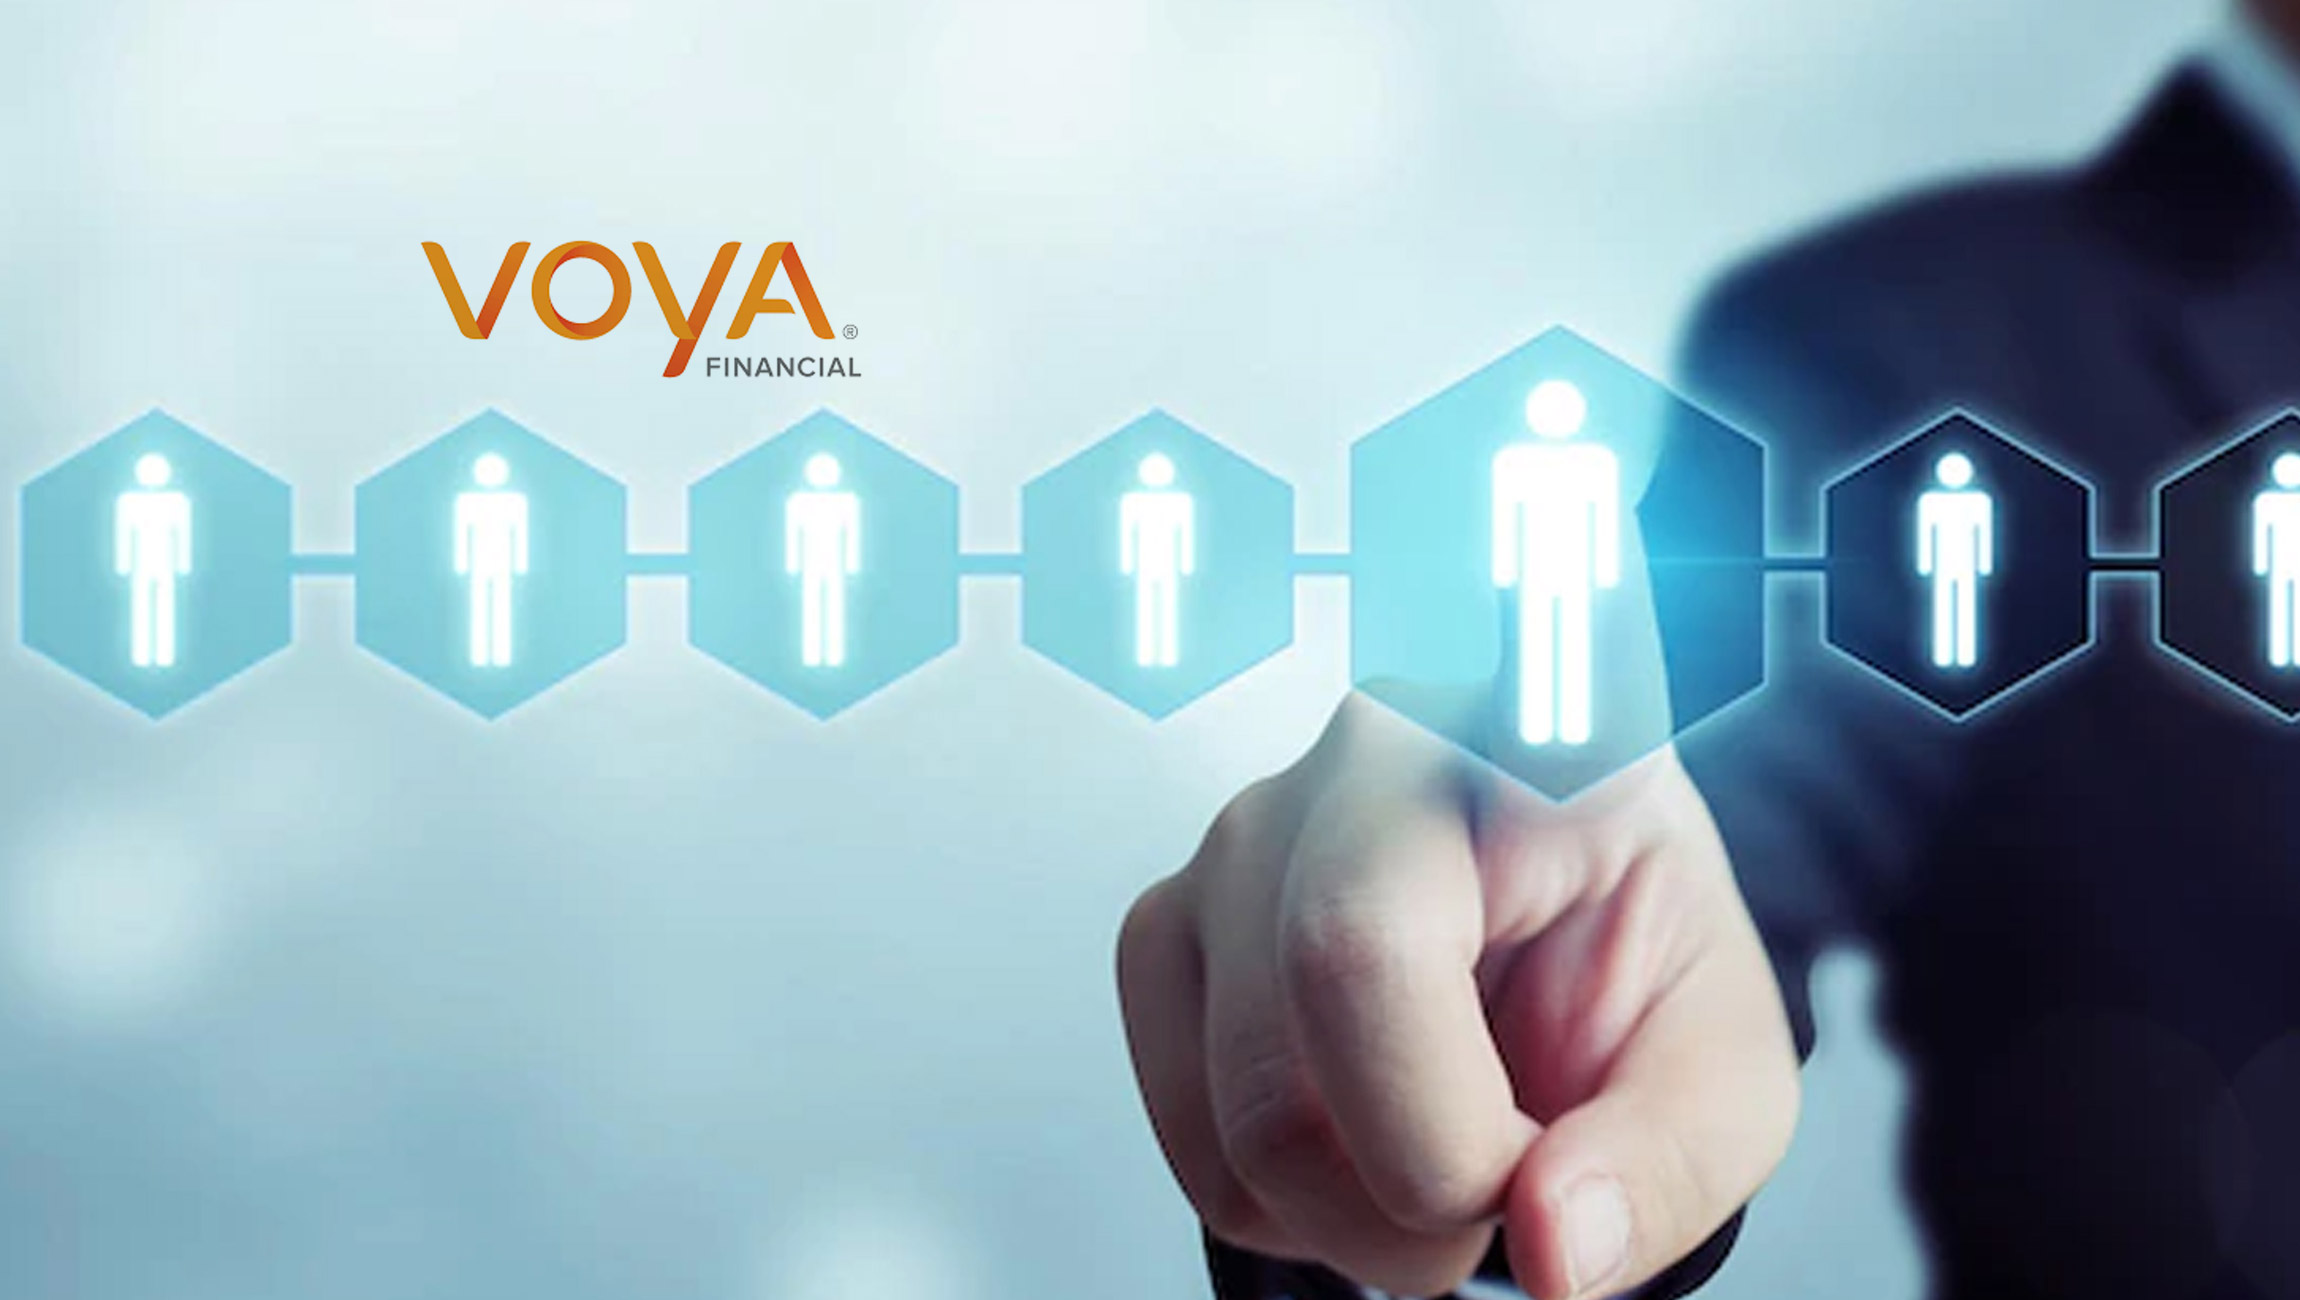 Voya Financial hires Jessica Saperstein to lead its Customer Experience Center of Excellence